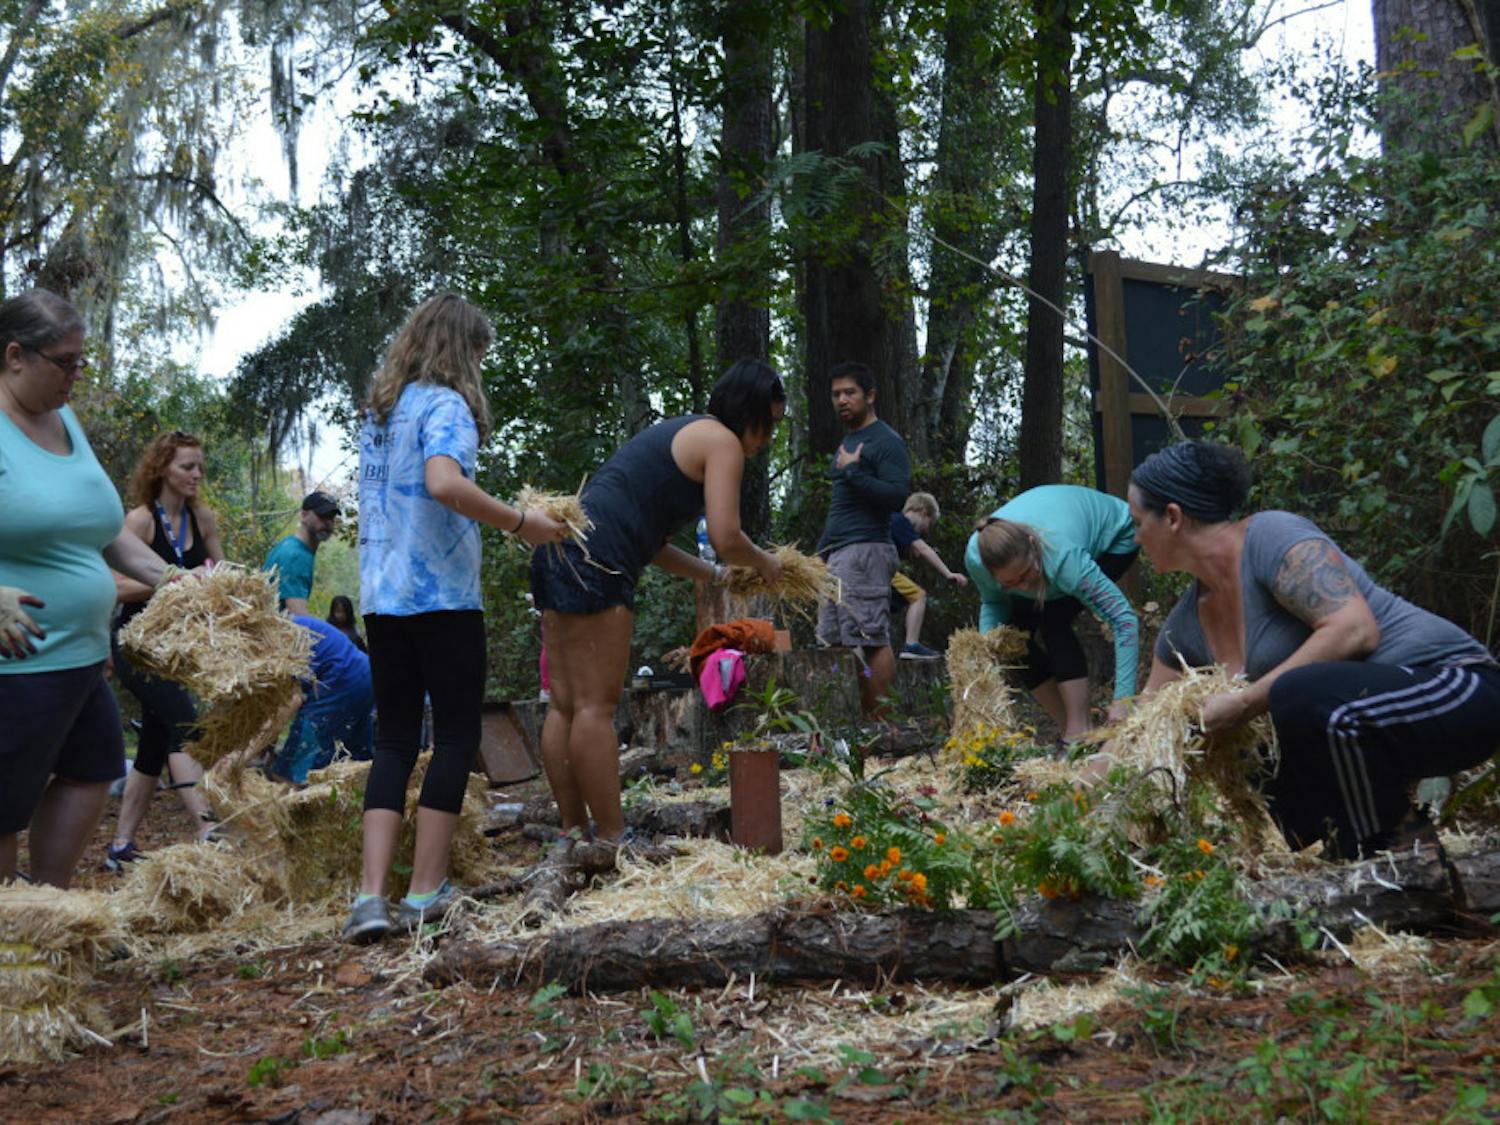 Volunteers spread hay after planting marigolds, milkweed and other perennials beside an outdoor classroom at Stephen Foster Elementary School. They took the day to beautify the campus in the wake of media specialist Leslie Williams’ death. Gillian Sweeney / Alligator Staff
&nbsp;